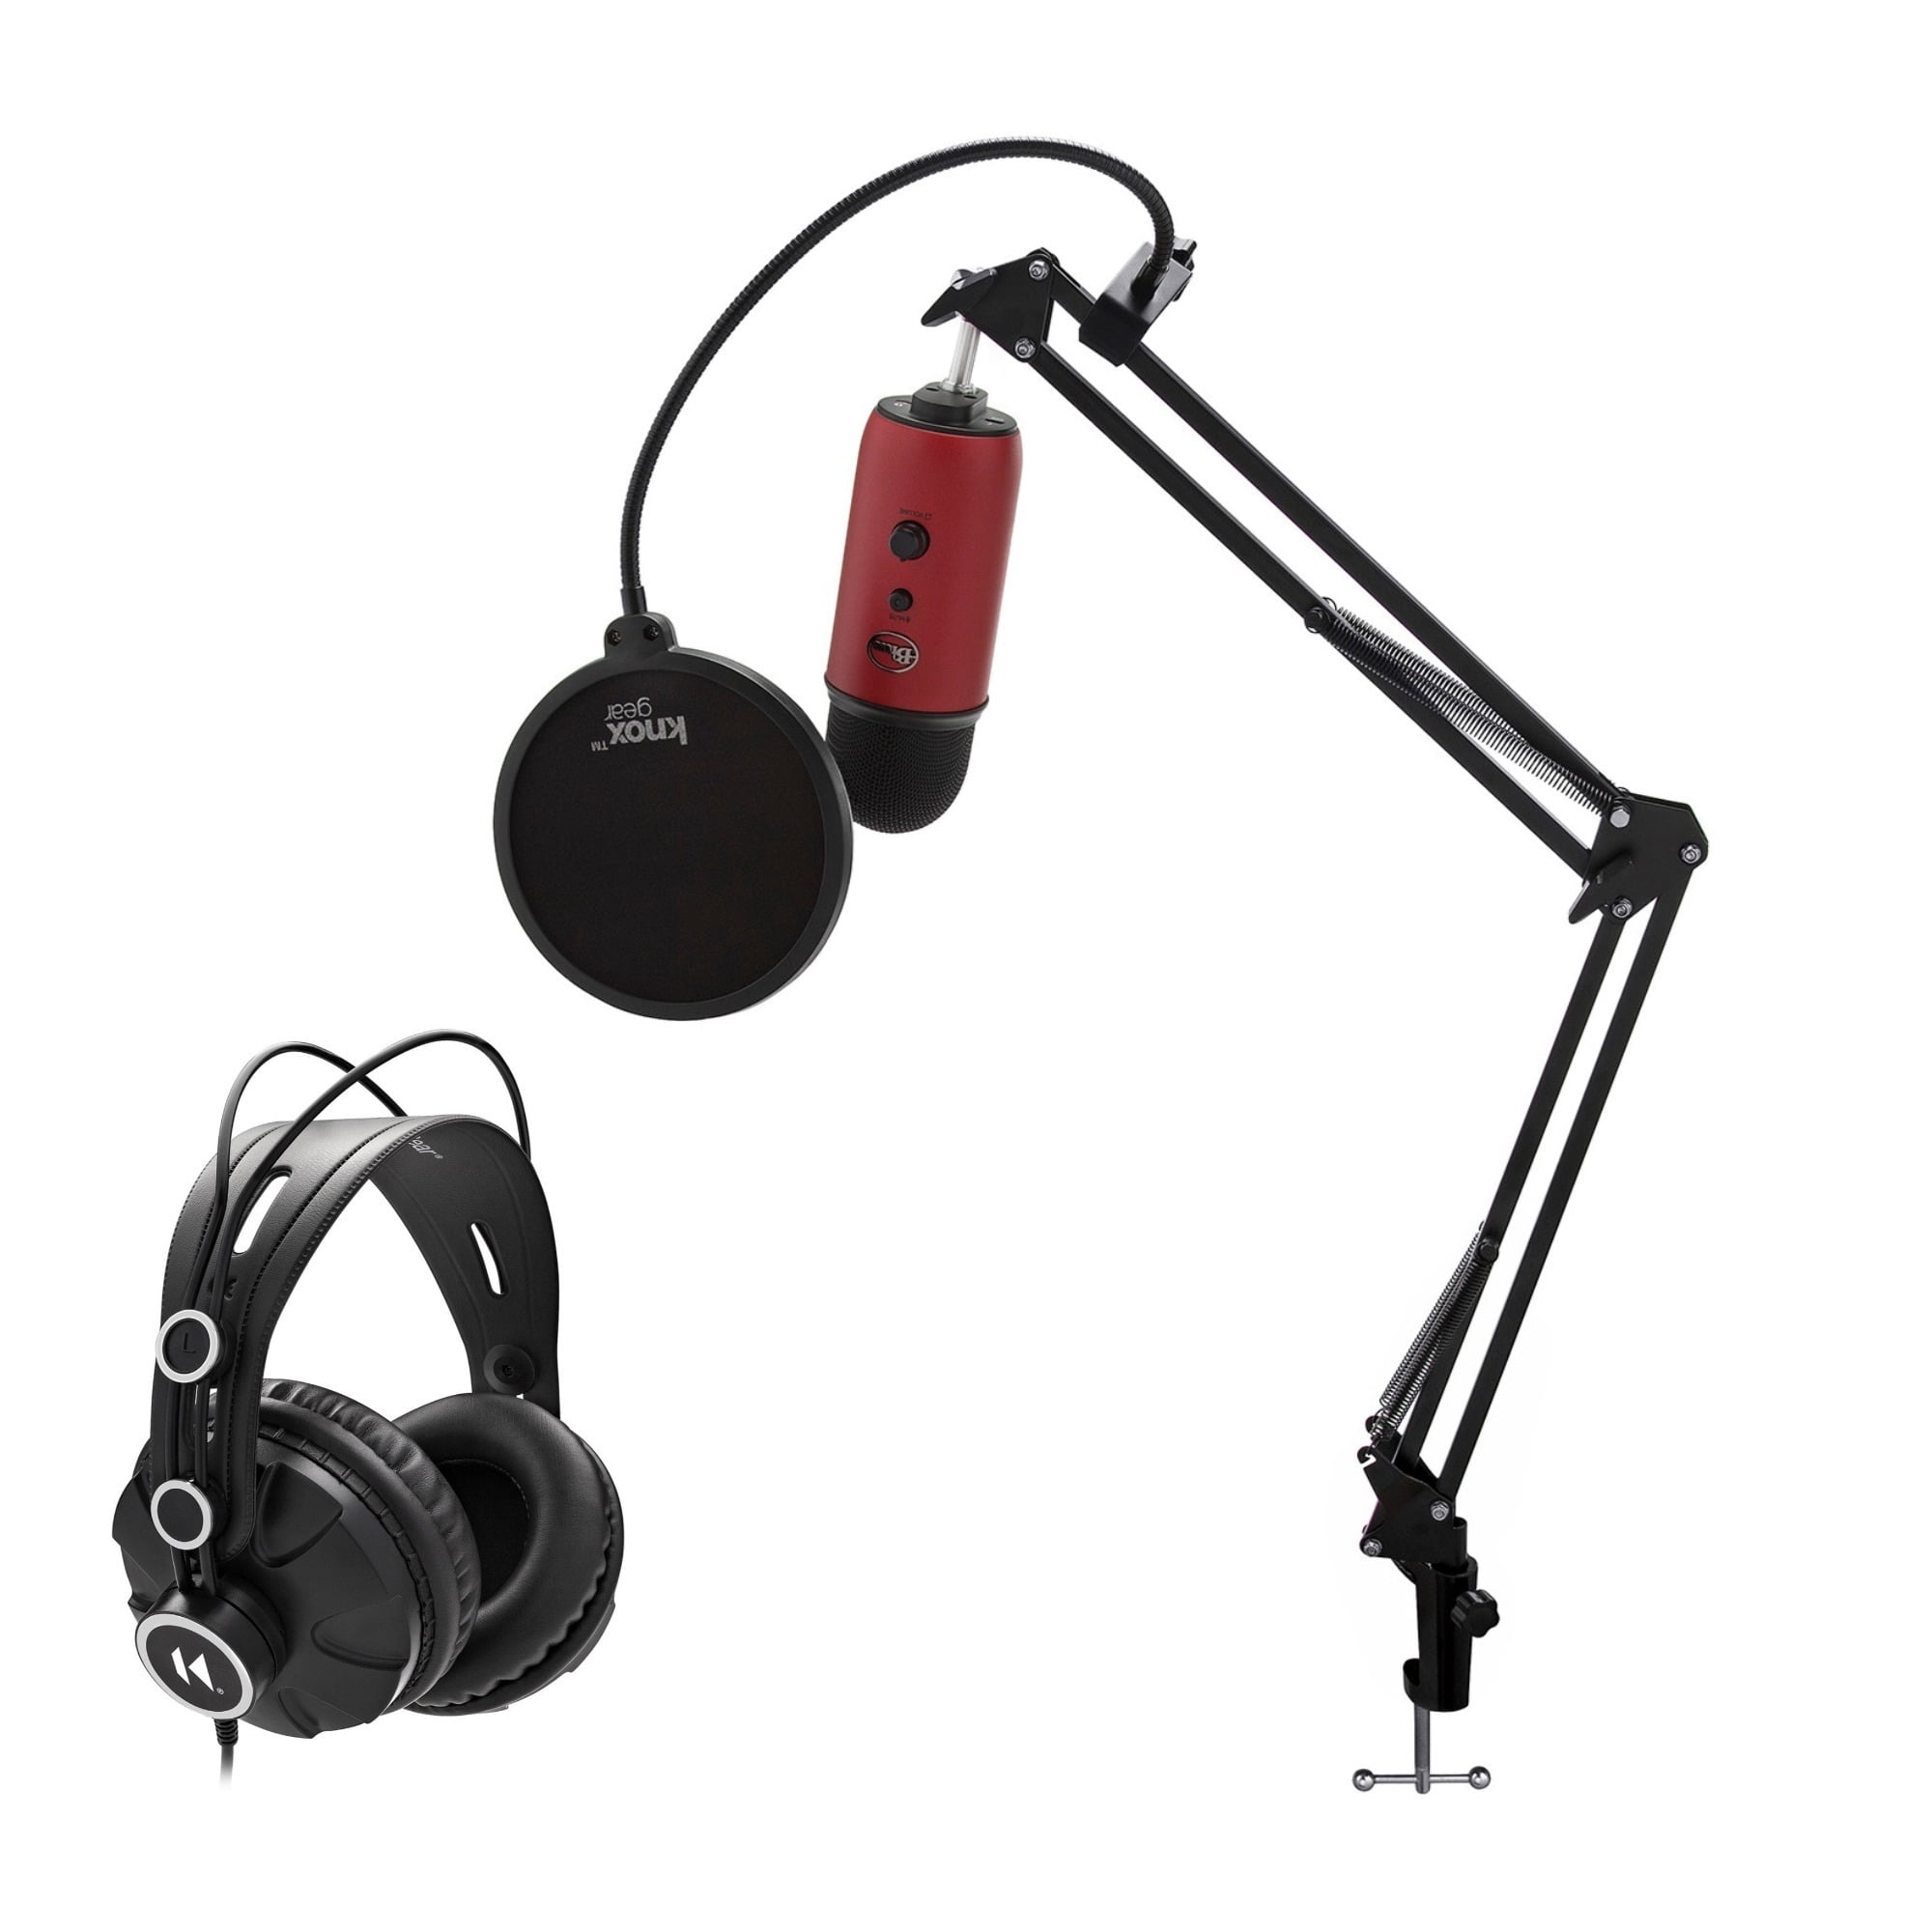 3 Items Rode NT-USB Condenser Microphone with Knox Mic Boom Arm Stand and Headphones Bundle 